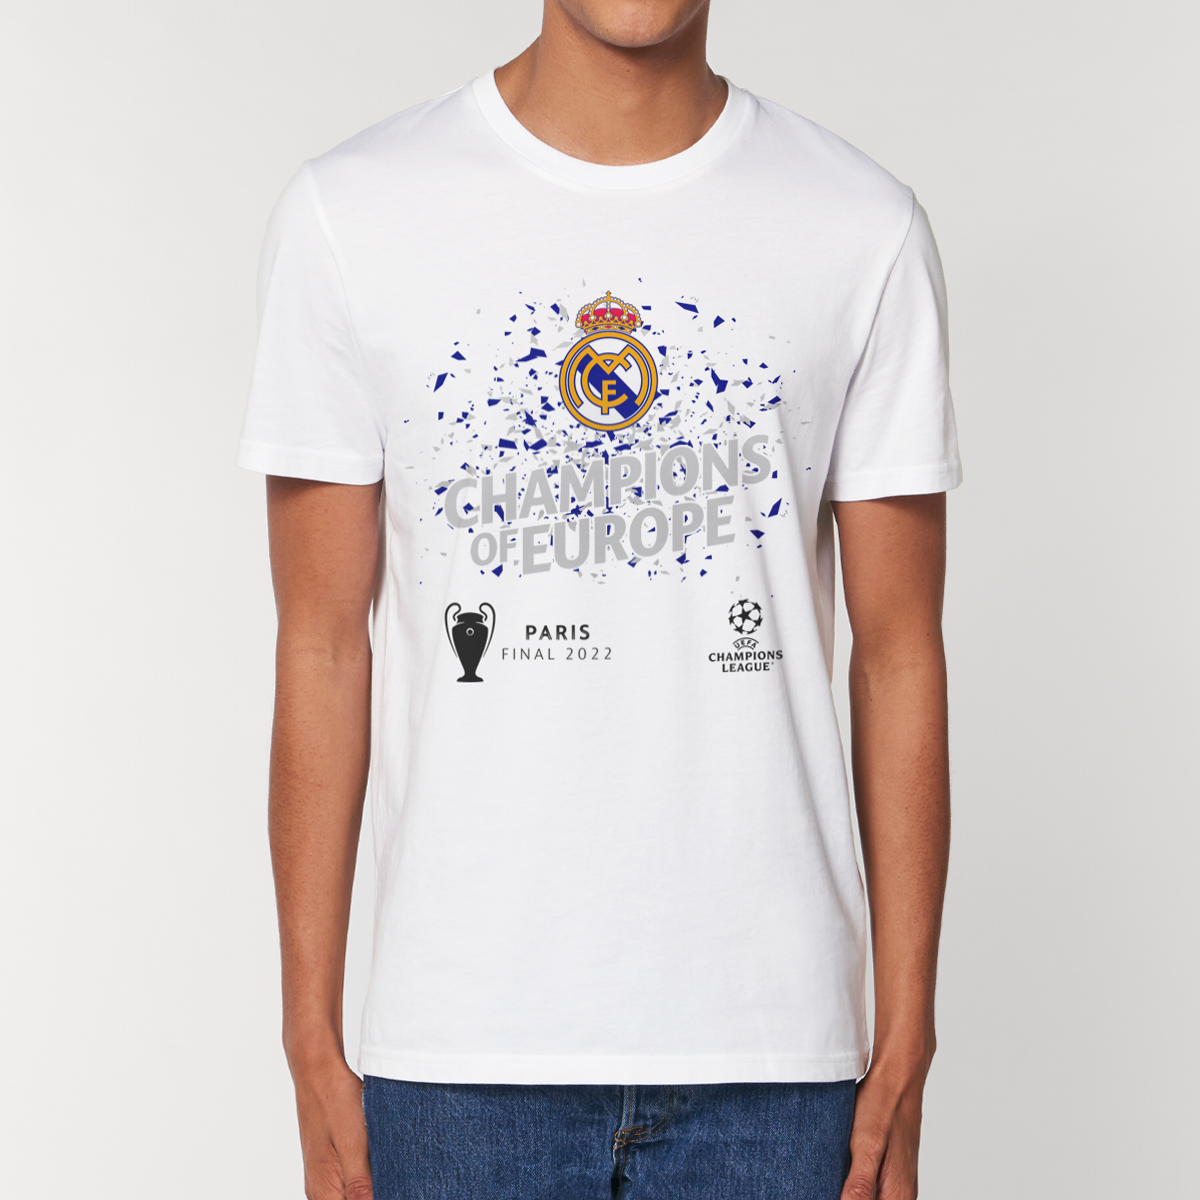 UEFA Champions League T-Shirts UEFA Club Competitions Online Store